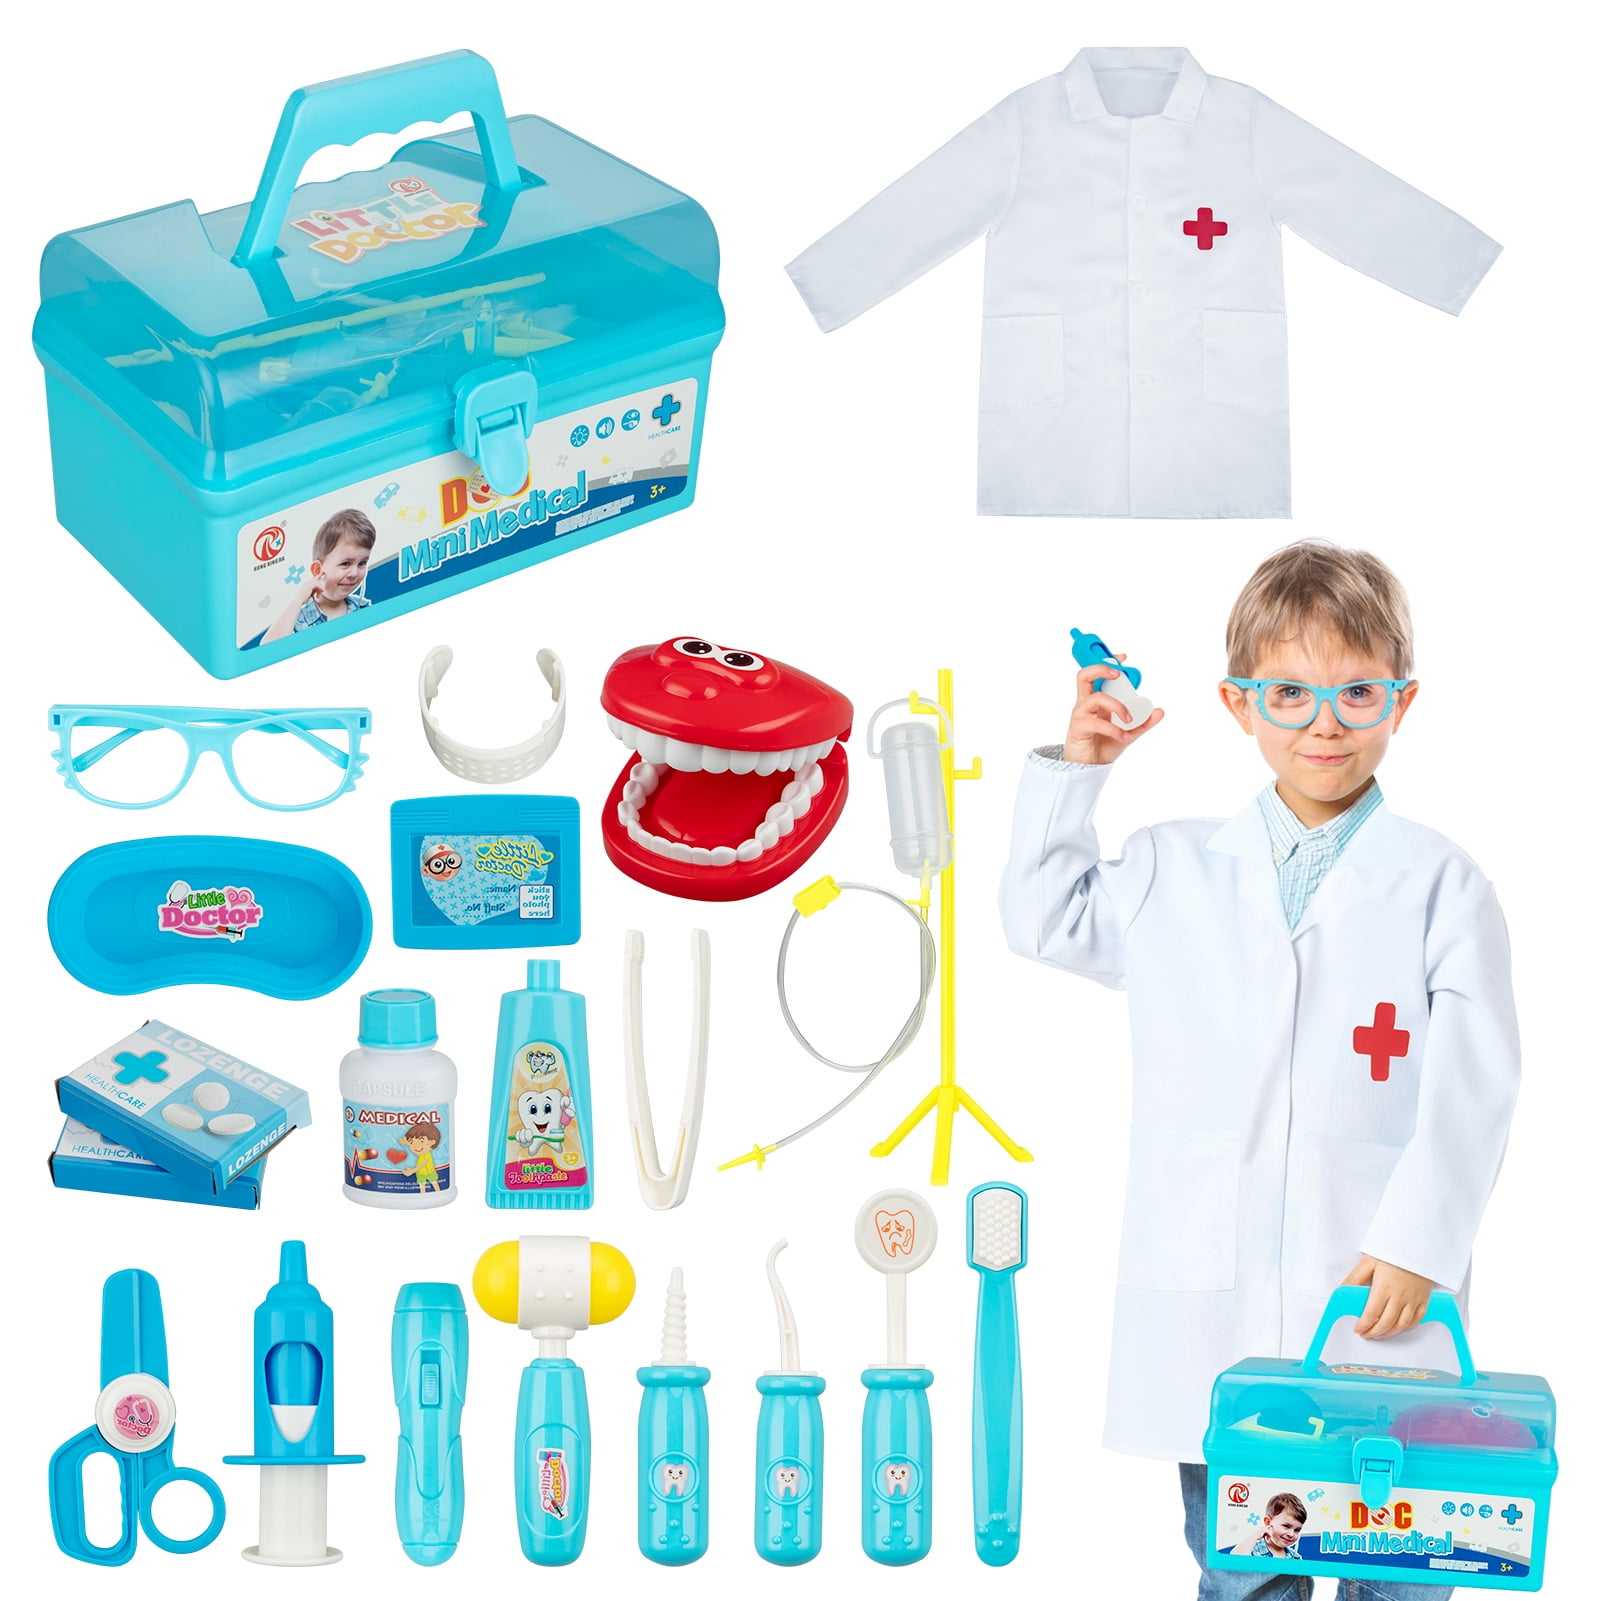 Juiluna Dentist Kit for Kids, 3 in 1 Dentist Toys for Kids, Pretend Play  Medical Doctor Kit with Teeth Toy and Dental Accessories, Toys for Boys  Girls 3 4 5 Years Old 34Pcs 